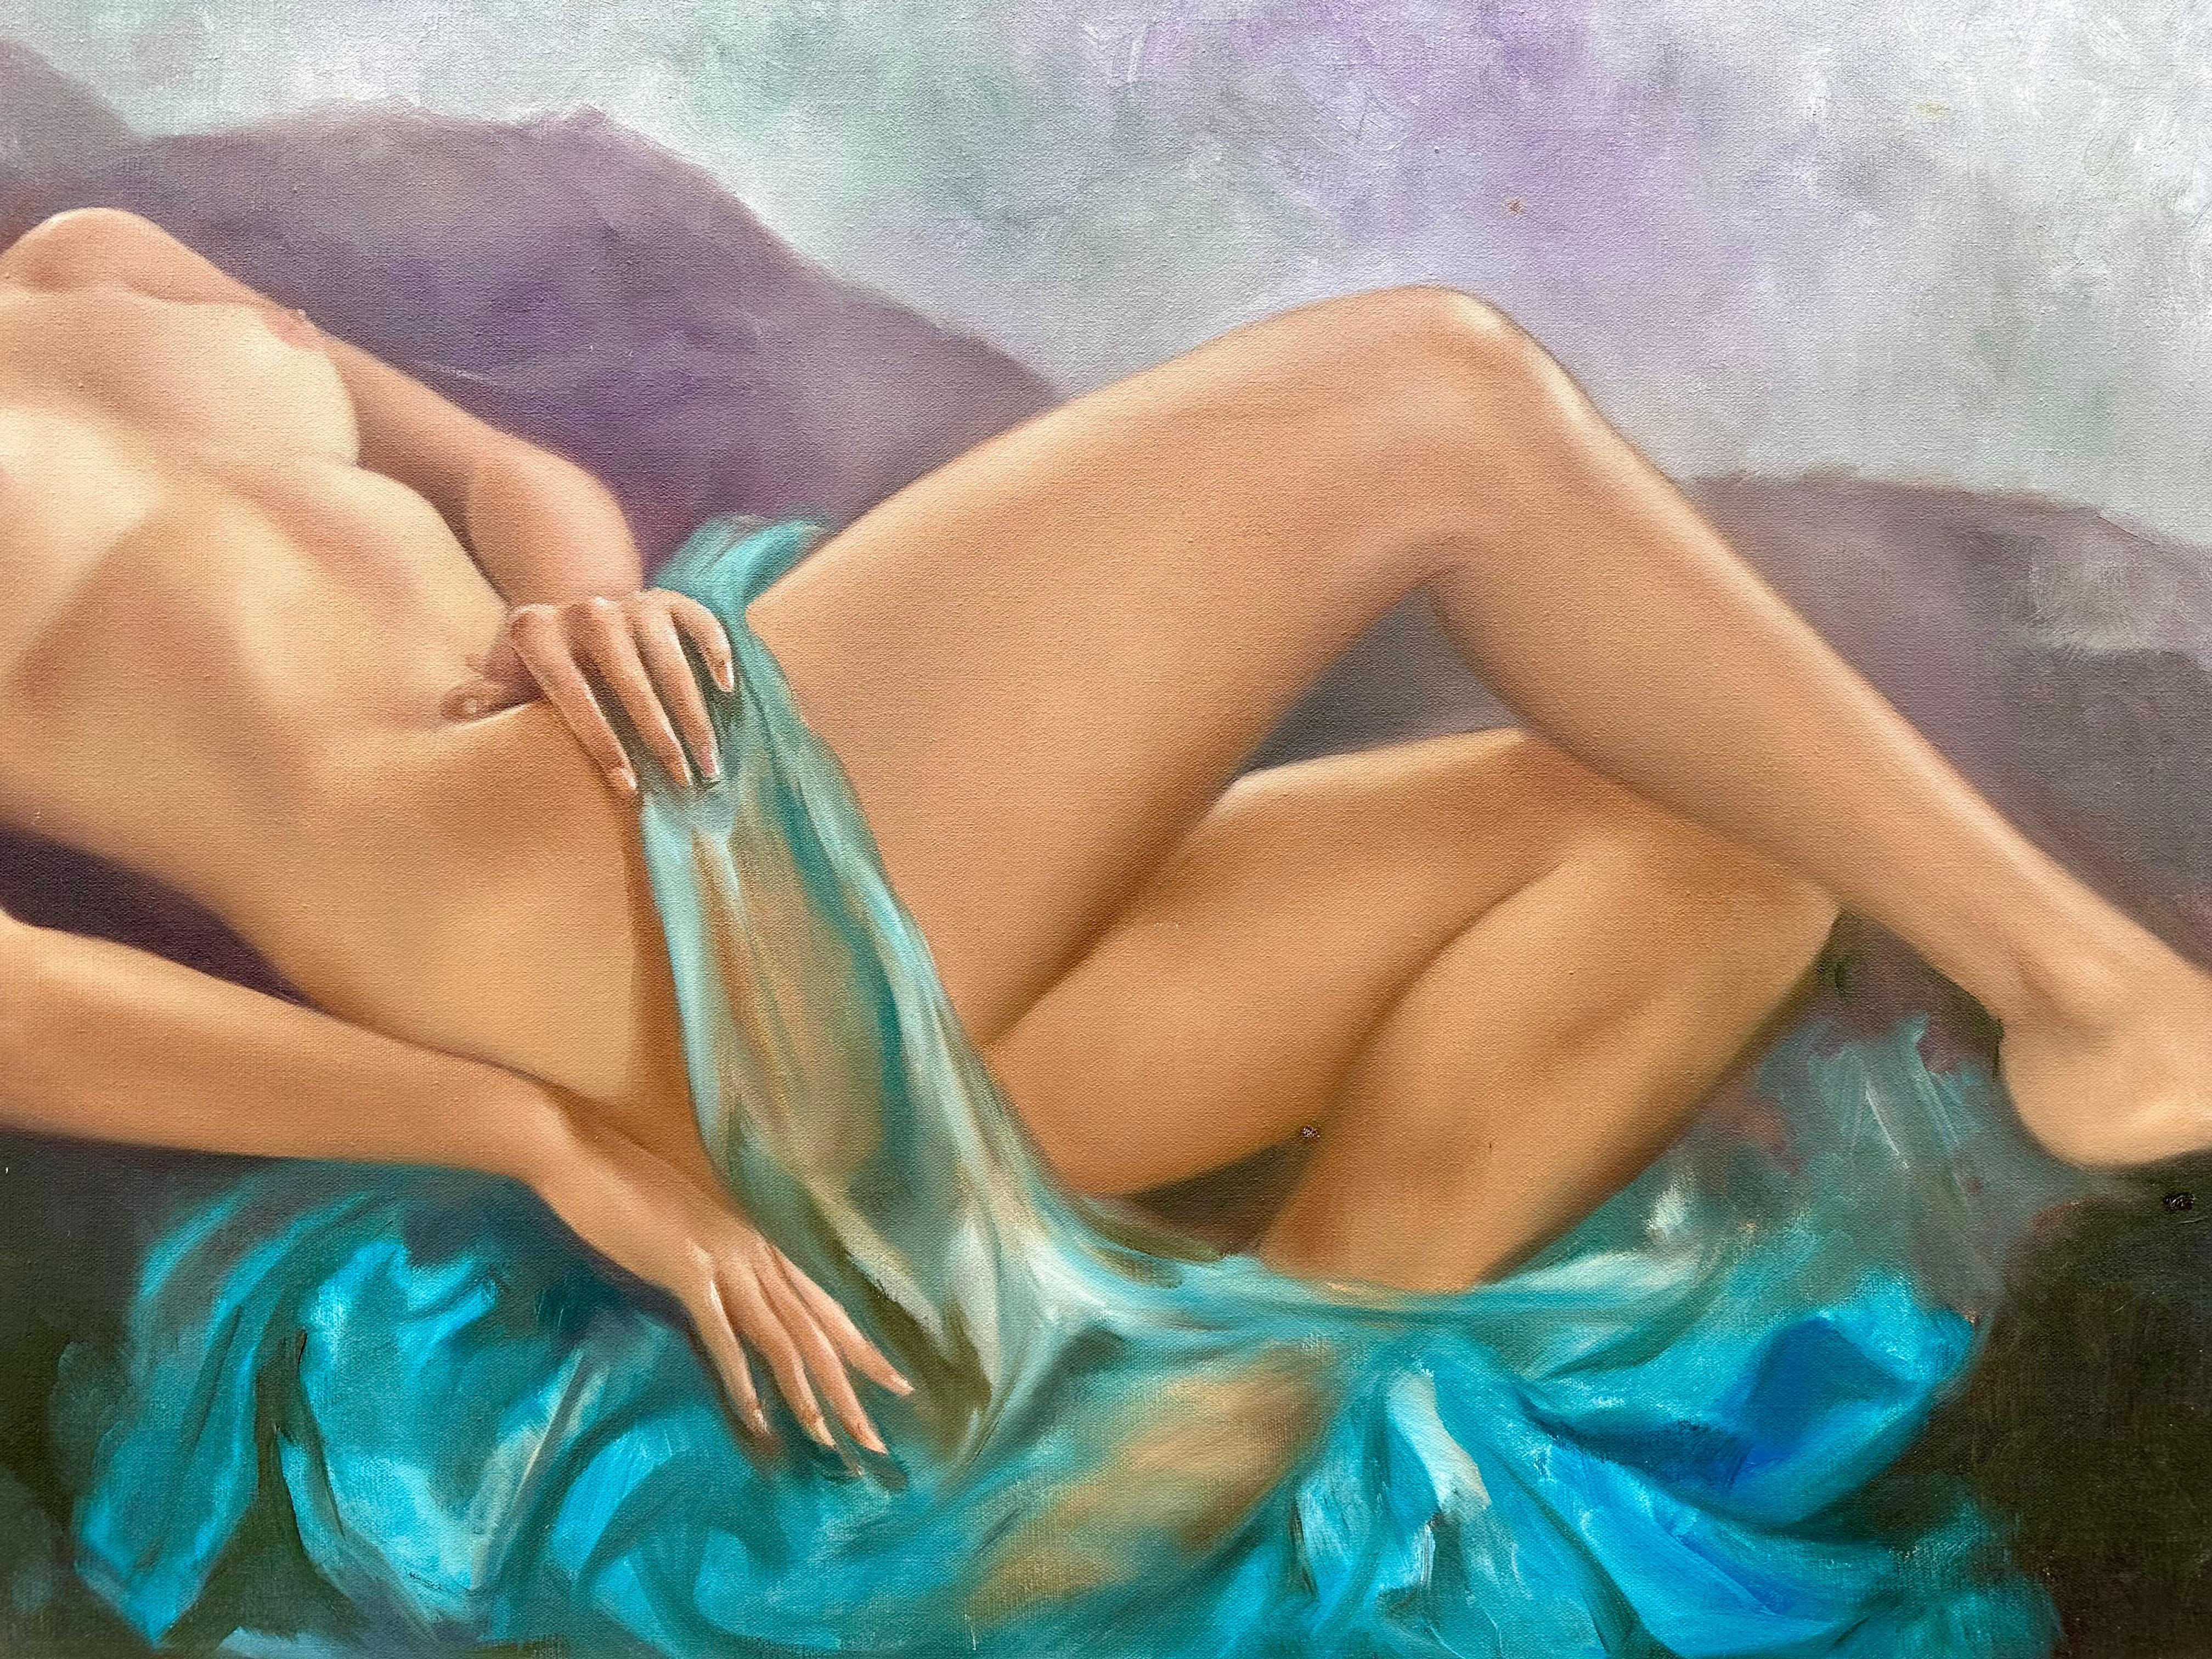 Painted Large Original Playboy Artist Leo Jansen Oil Painting of a Reclining Nude Woman For Sale